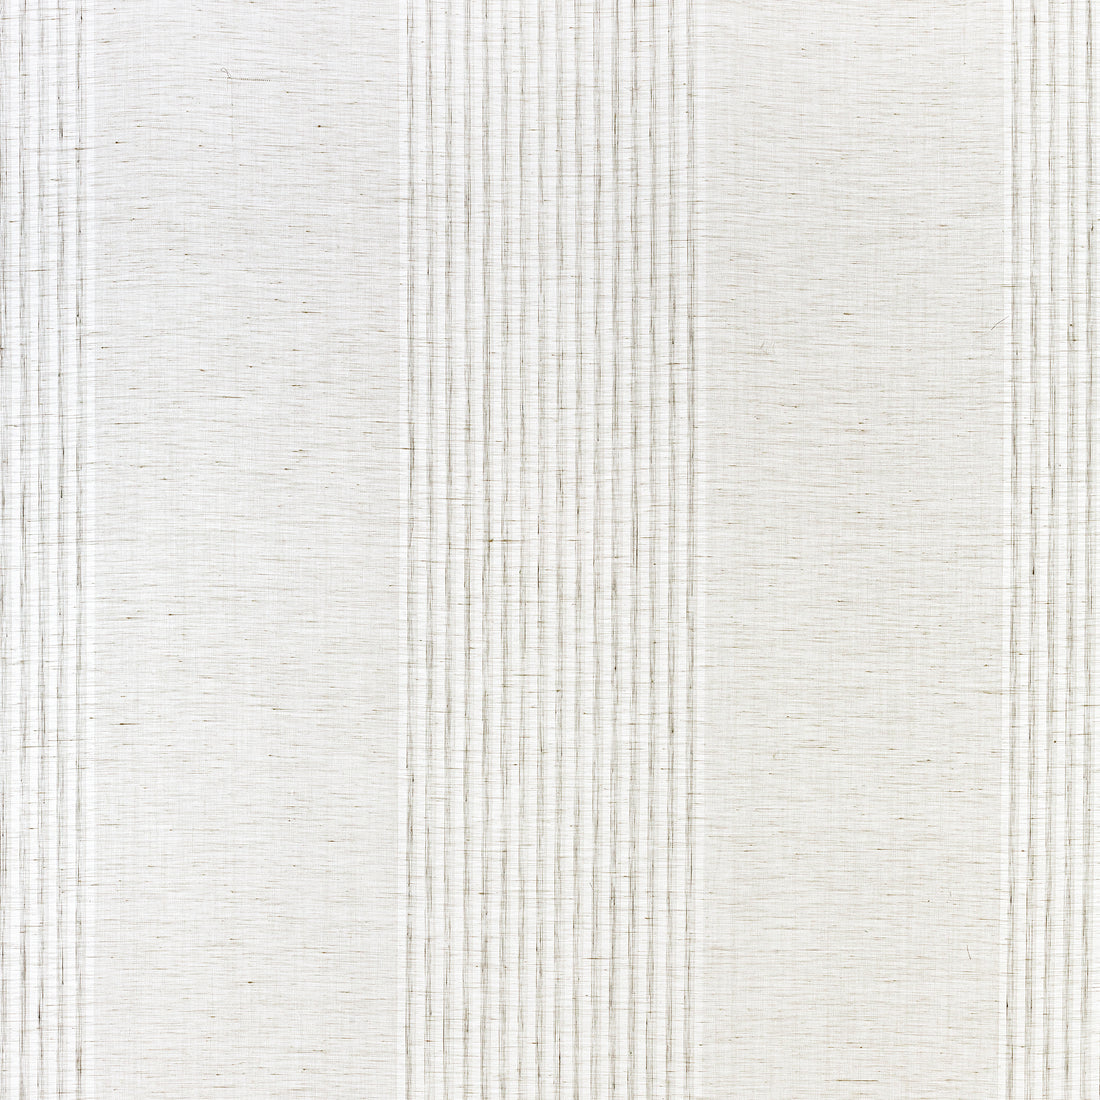 Mystic Stripe fabric in flax color - pattern number FWW7110 - by Thibaut in the Atmosphere collection